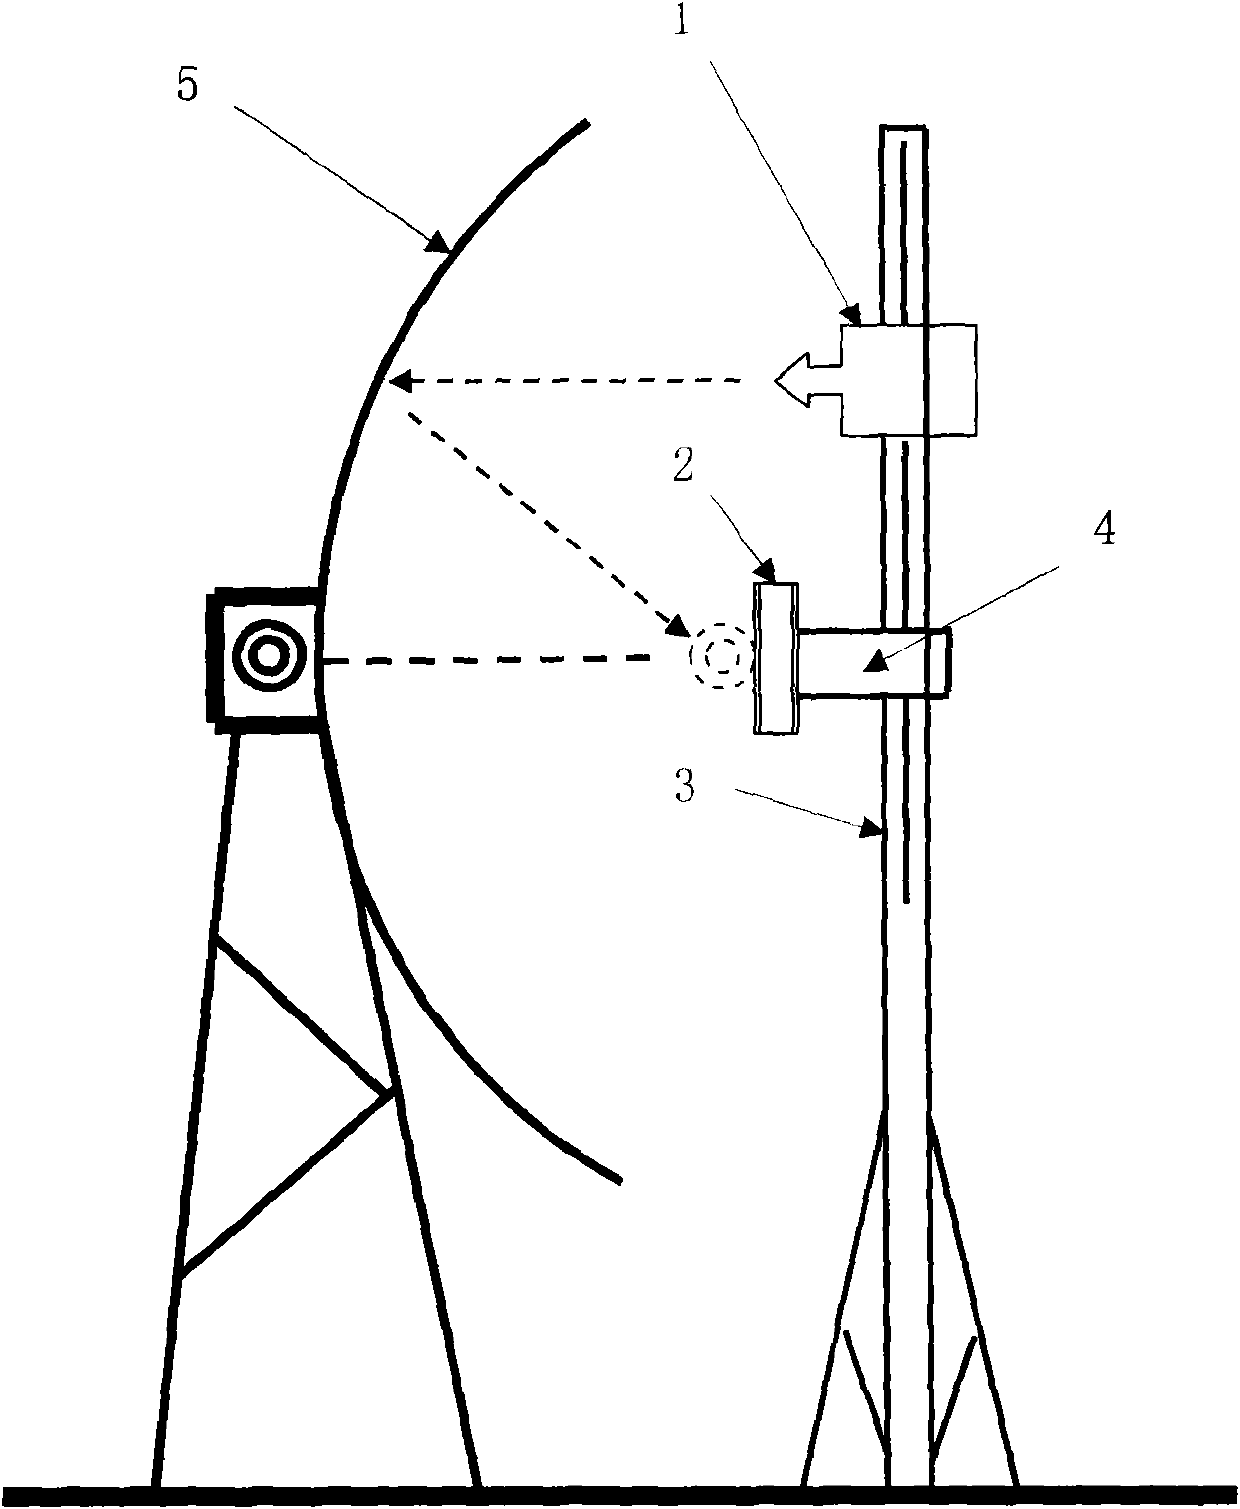 Device for testing focal spots focused by solar parabolic concentrator